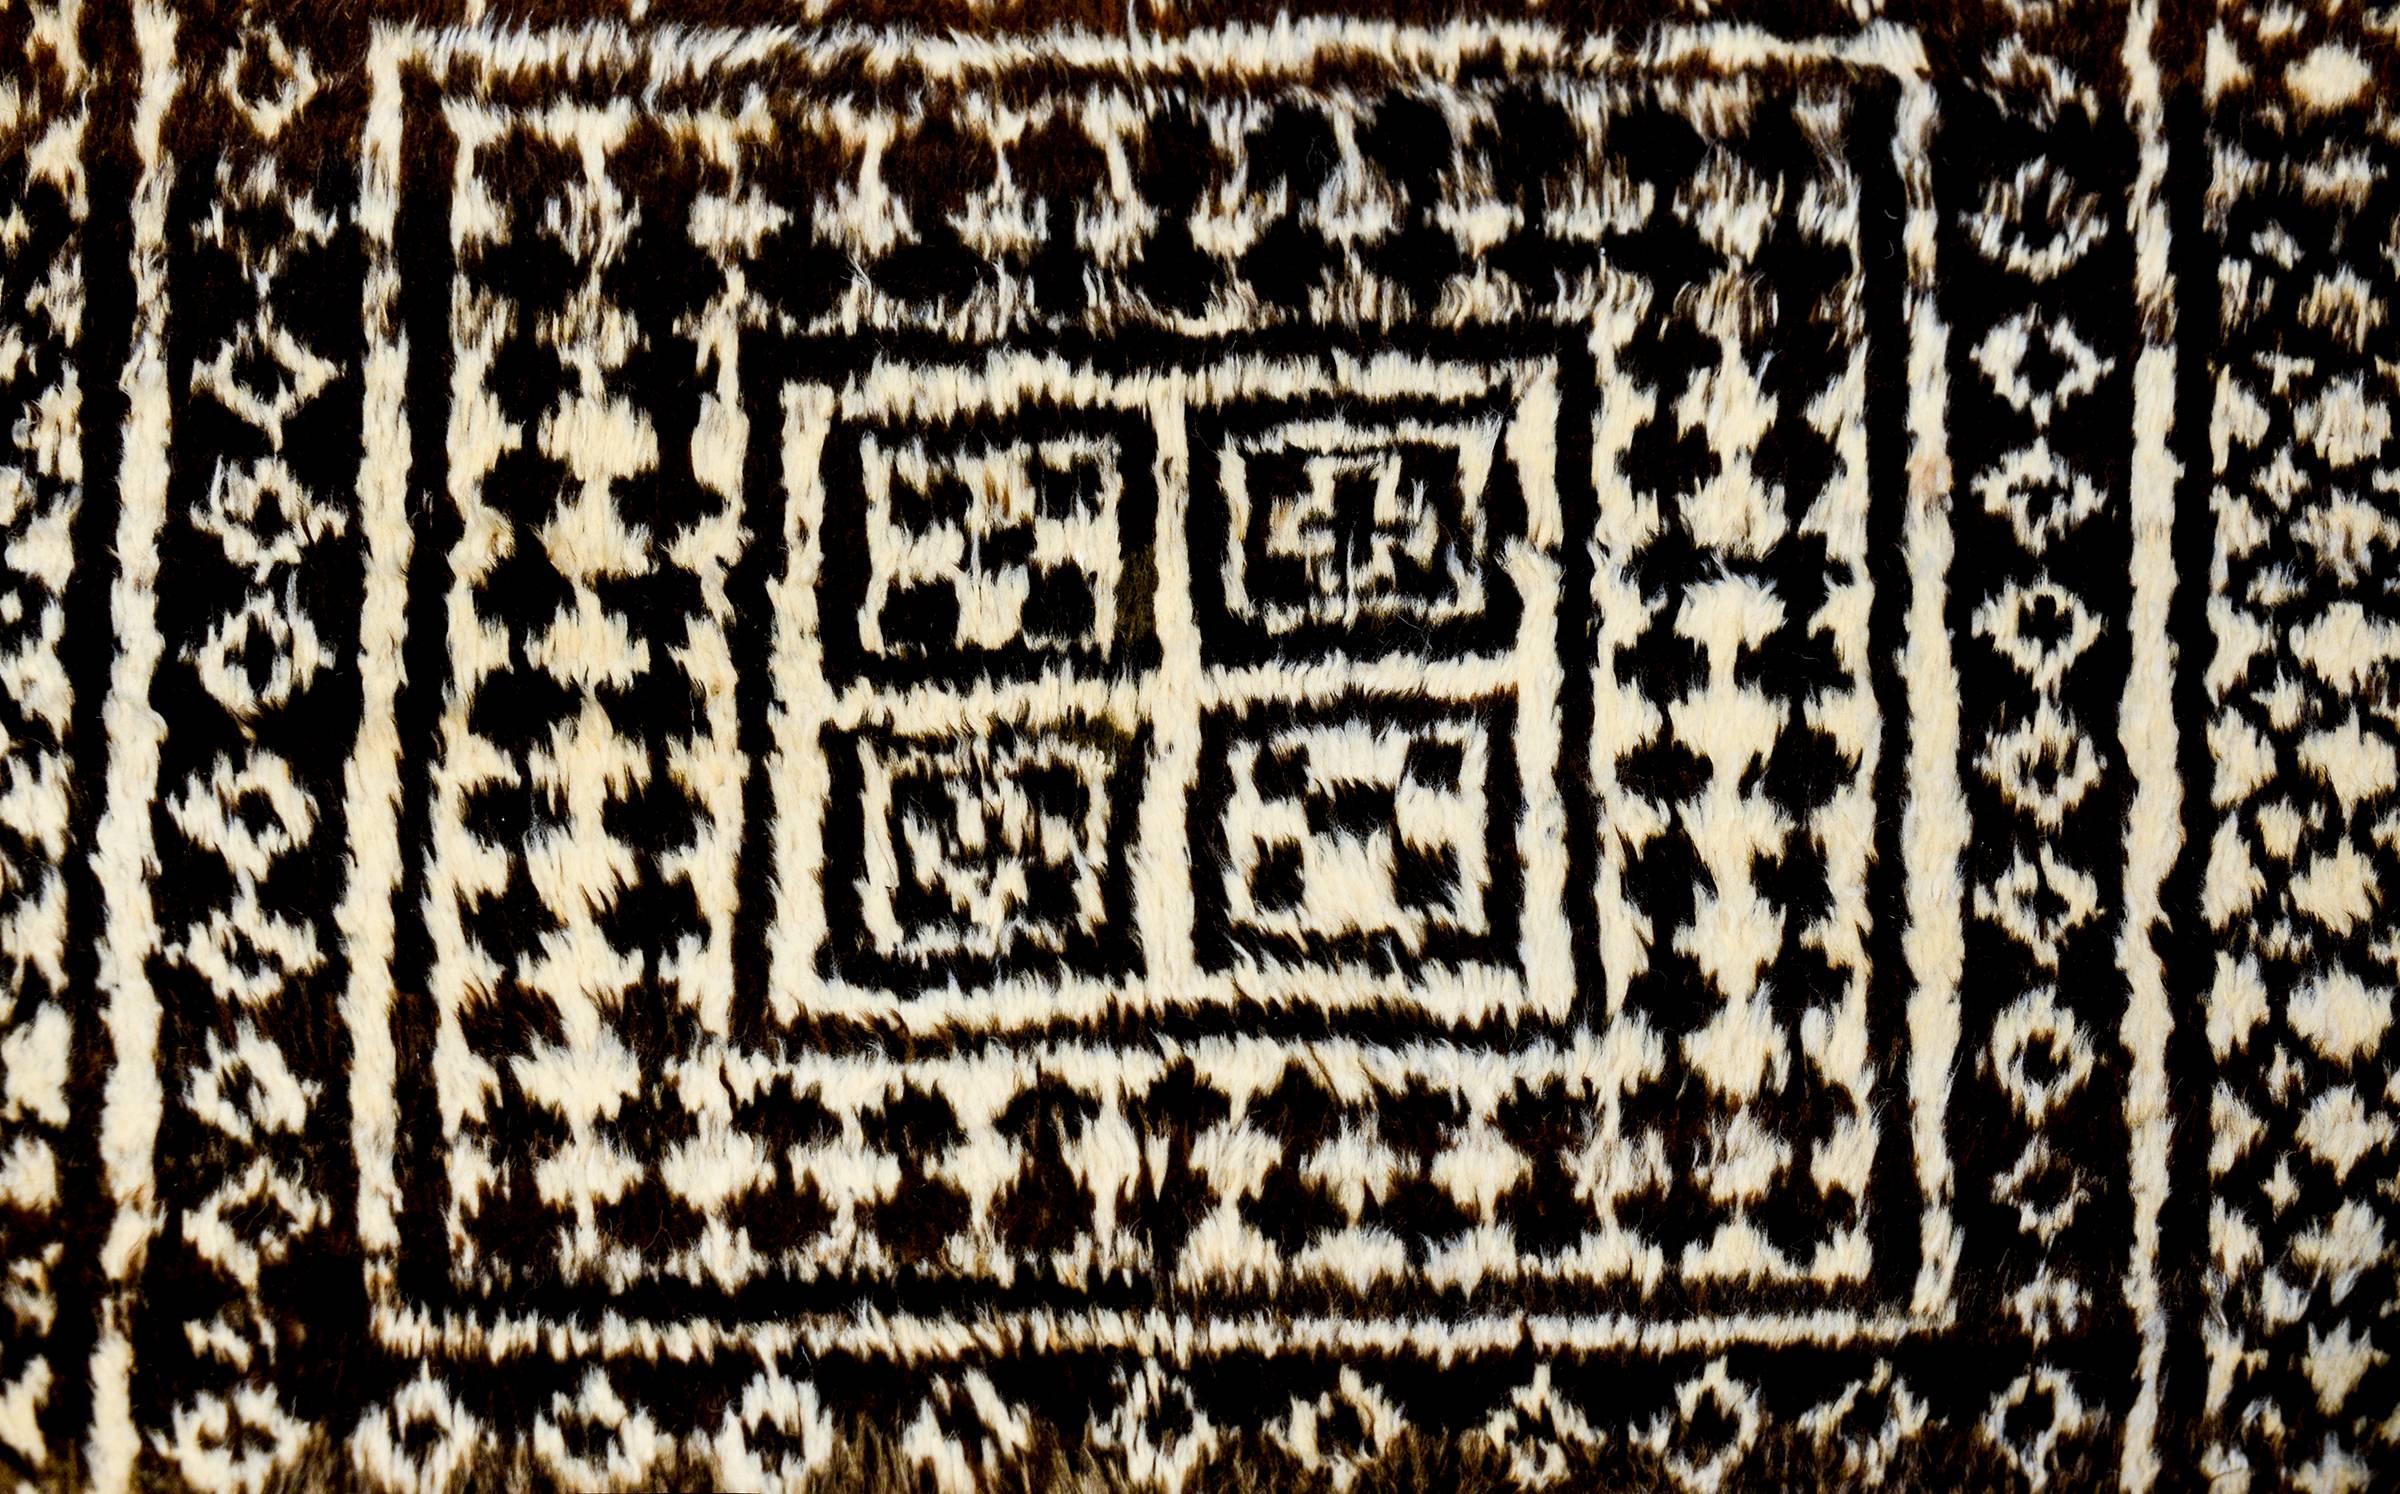 An incredible 19th century Persian Gabbeh rug with an amazing geometric pattern of diamonds, squares, zigzags, checkerboards, and chevron stripes, all woven in natural undyed wool.